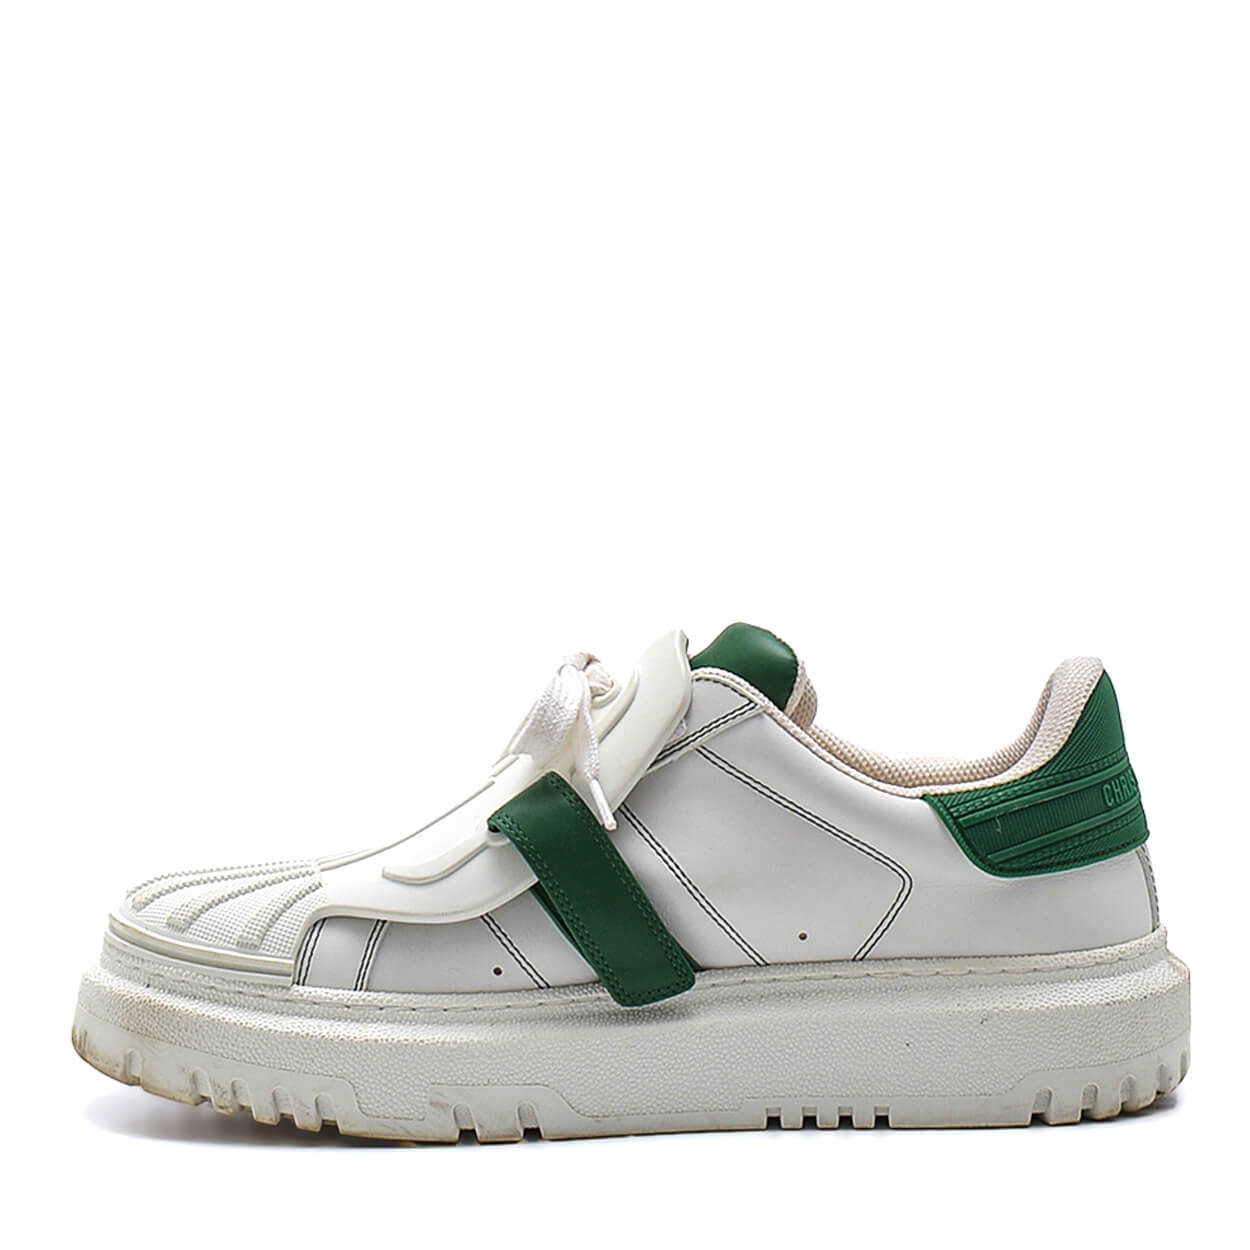 Christian Dior - White & Green Leather and Rubber Dior ID Sneakers